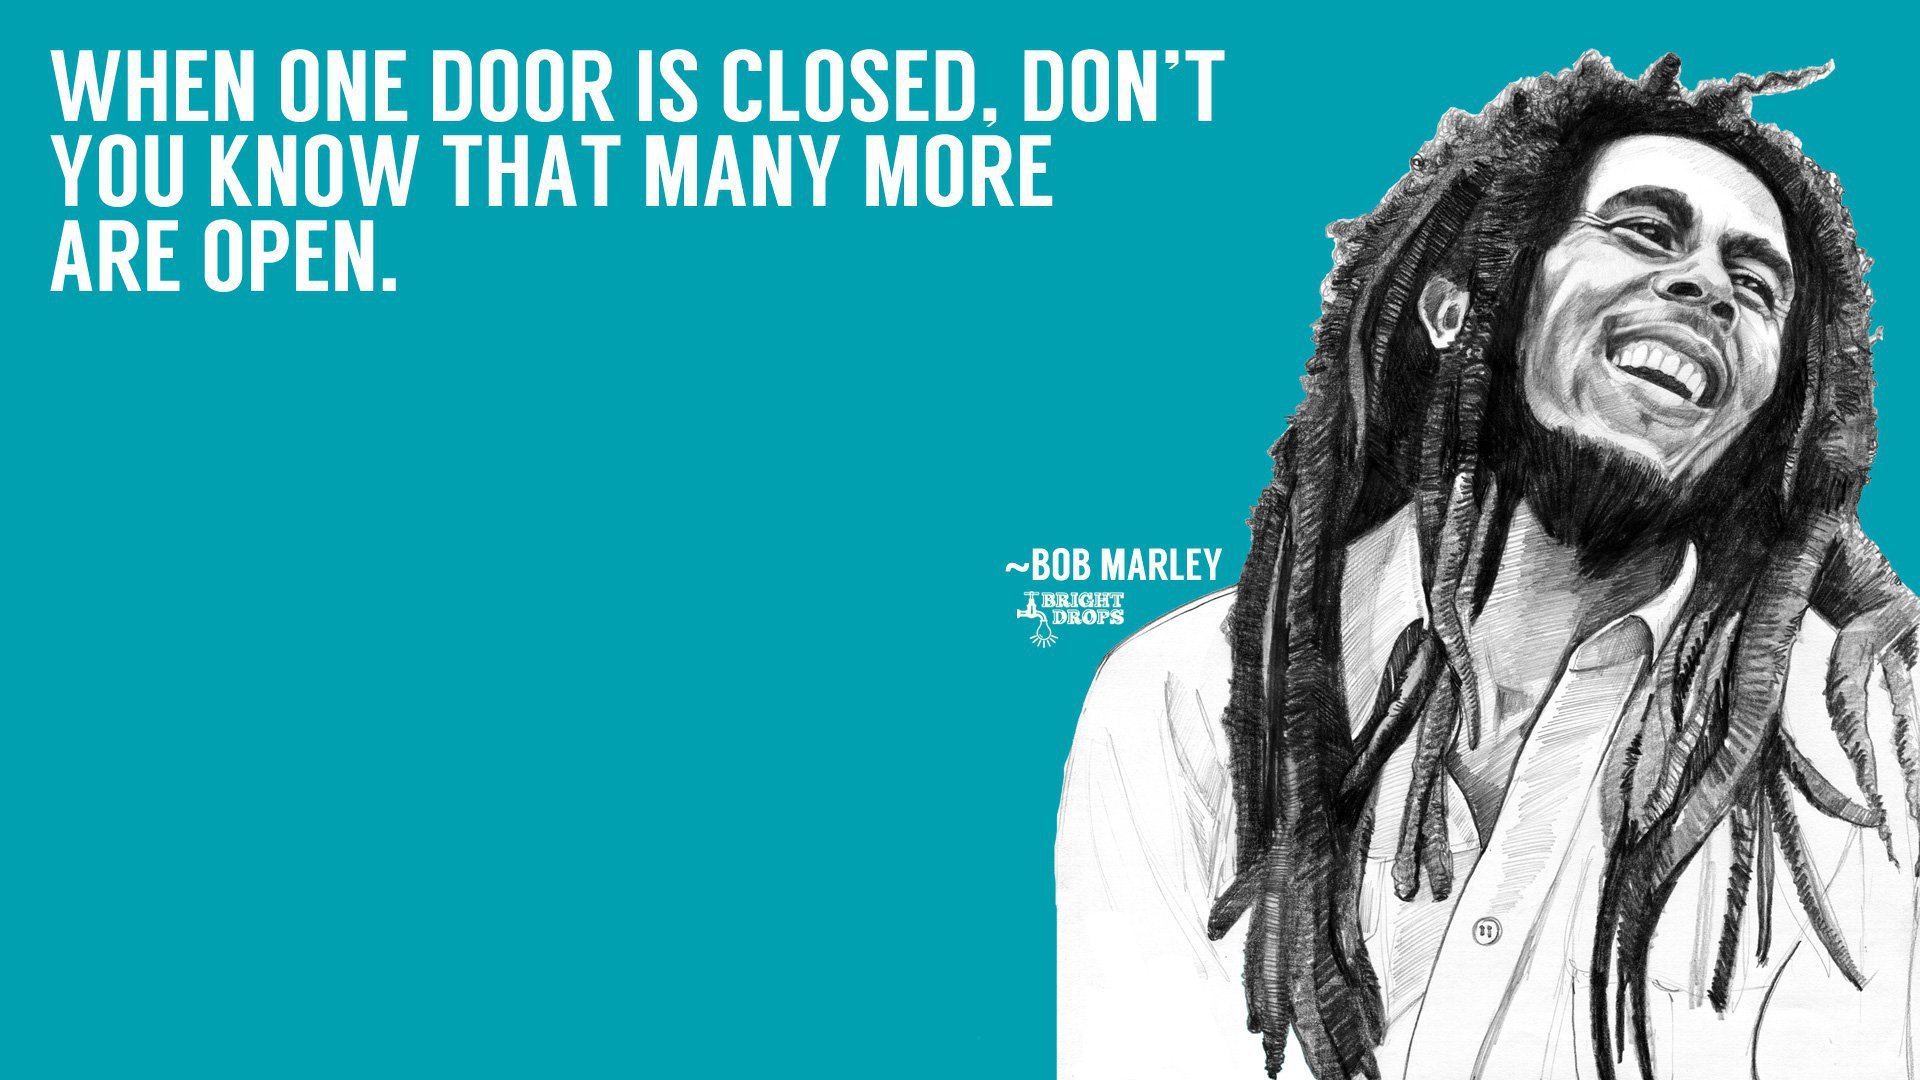 15 Bob Marley Quotes to Free Your Mind1920 x 1080